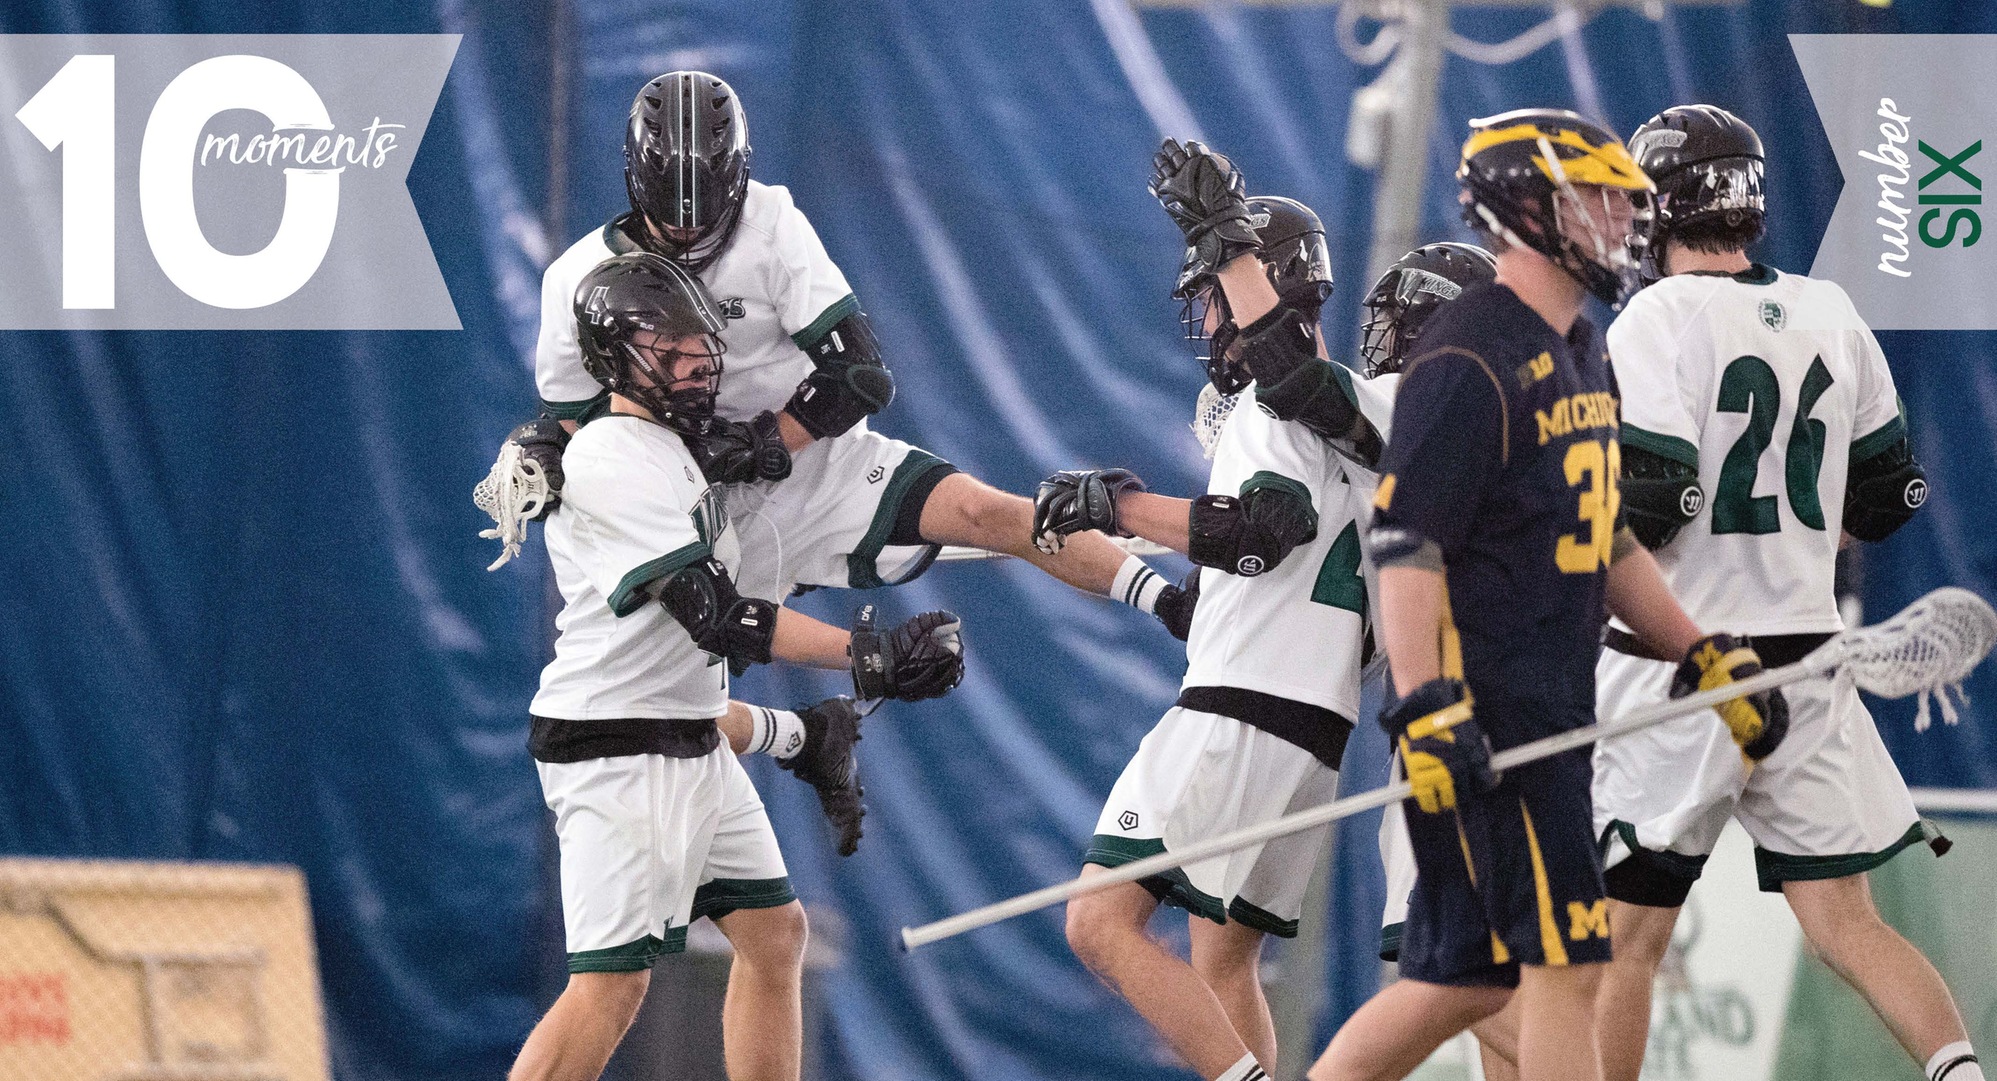 2016-17 CSU Athletics Top 10 Moments | #6 Men's Lacrosse Hosts Michigan for Inaugural Game